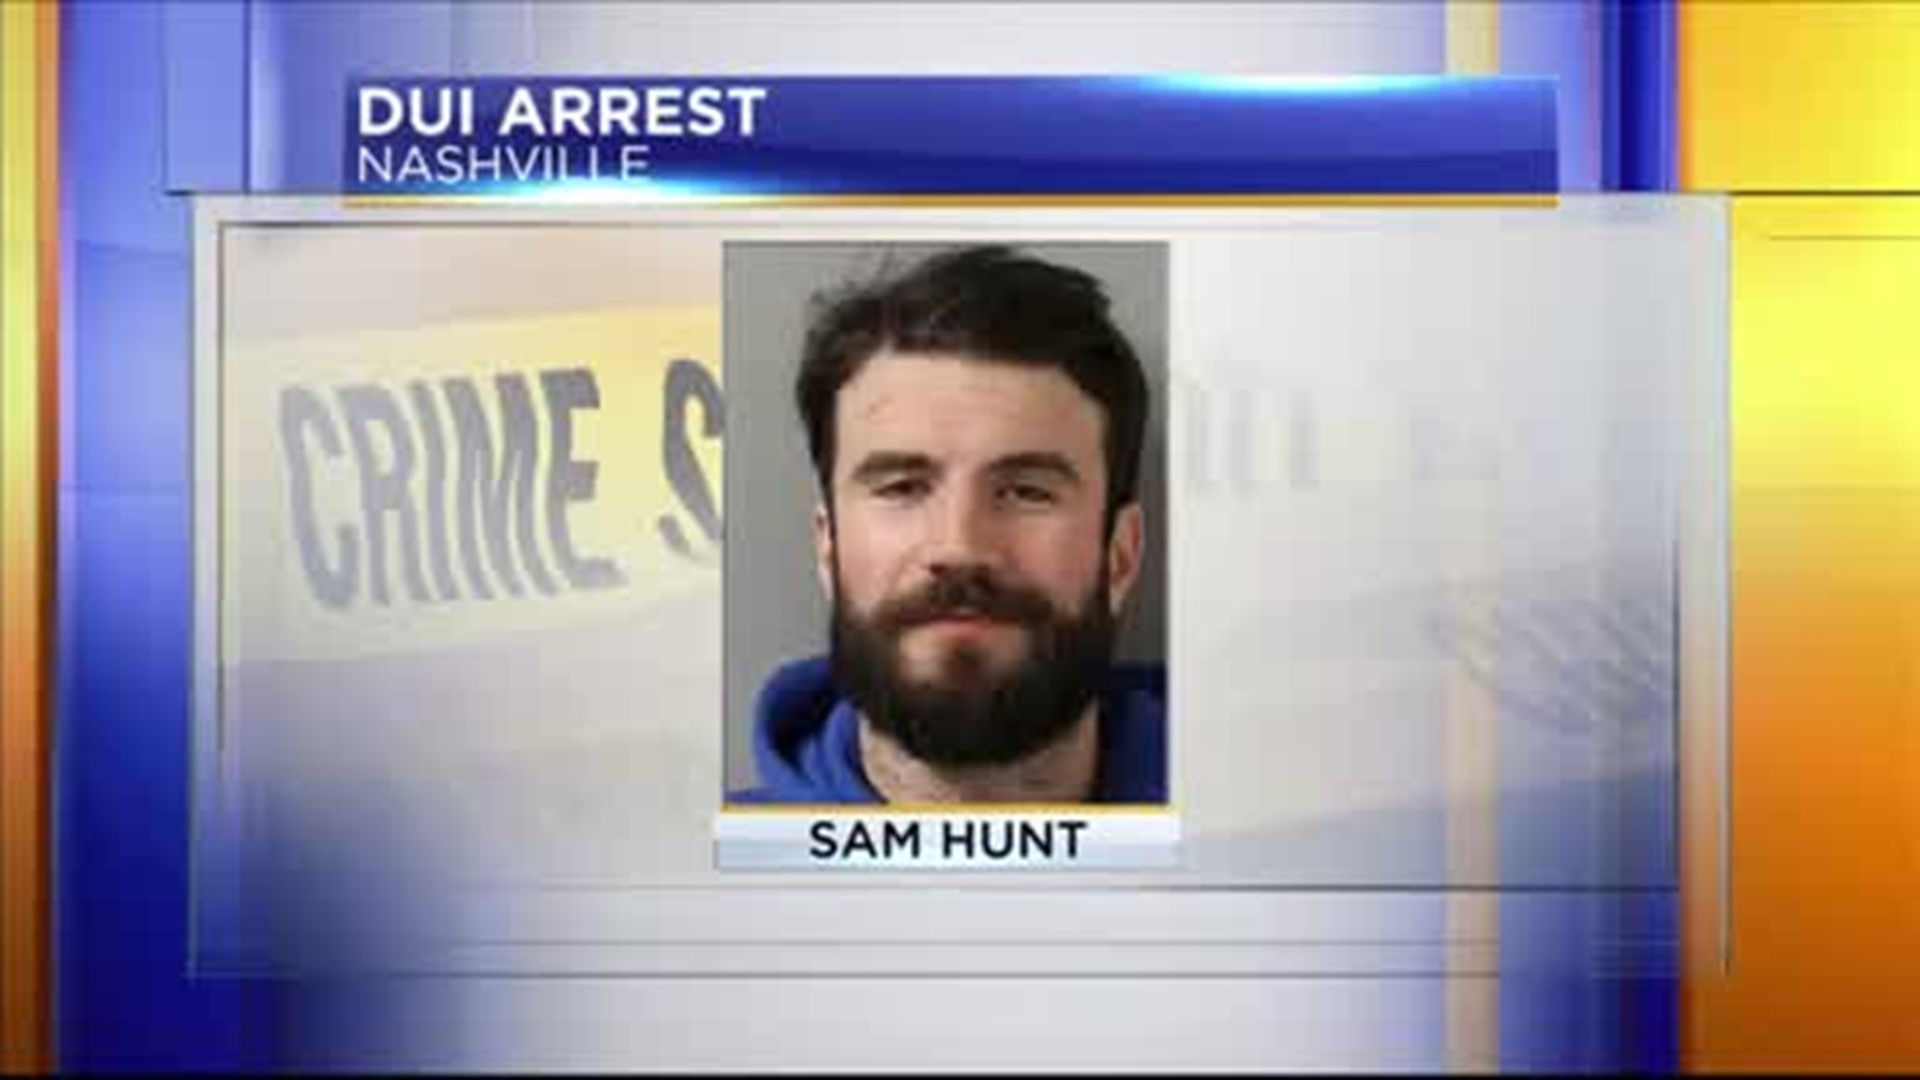 Country singer Sam Hunt was arrested for driving under the influence and violation of the open container law after police in Nashville stopped him for driving the wrong way down a one-way road.